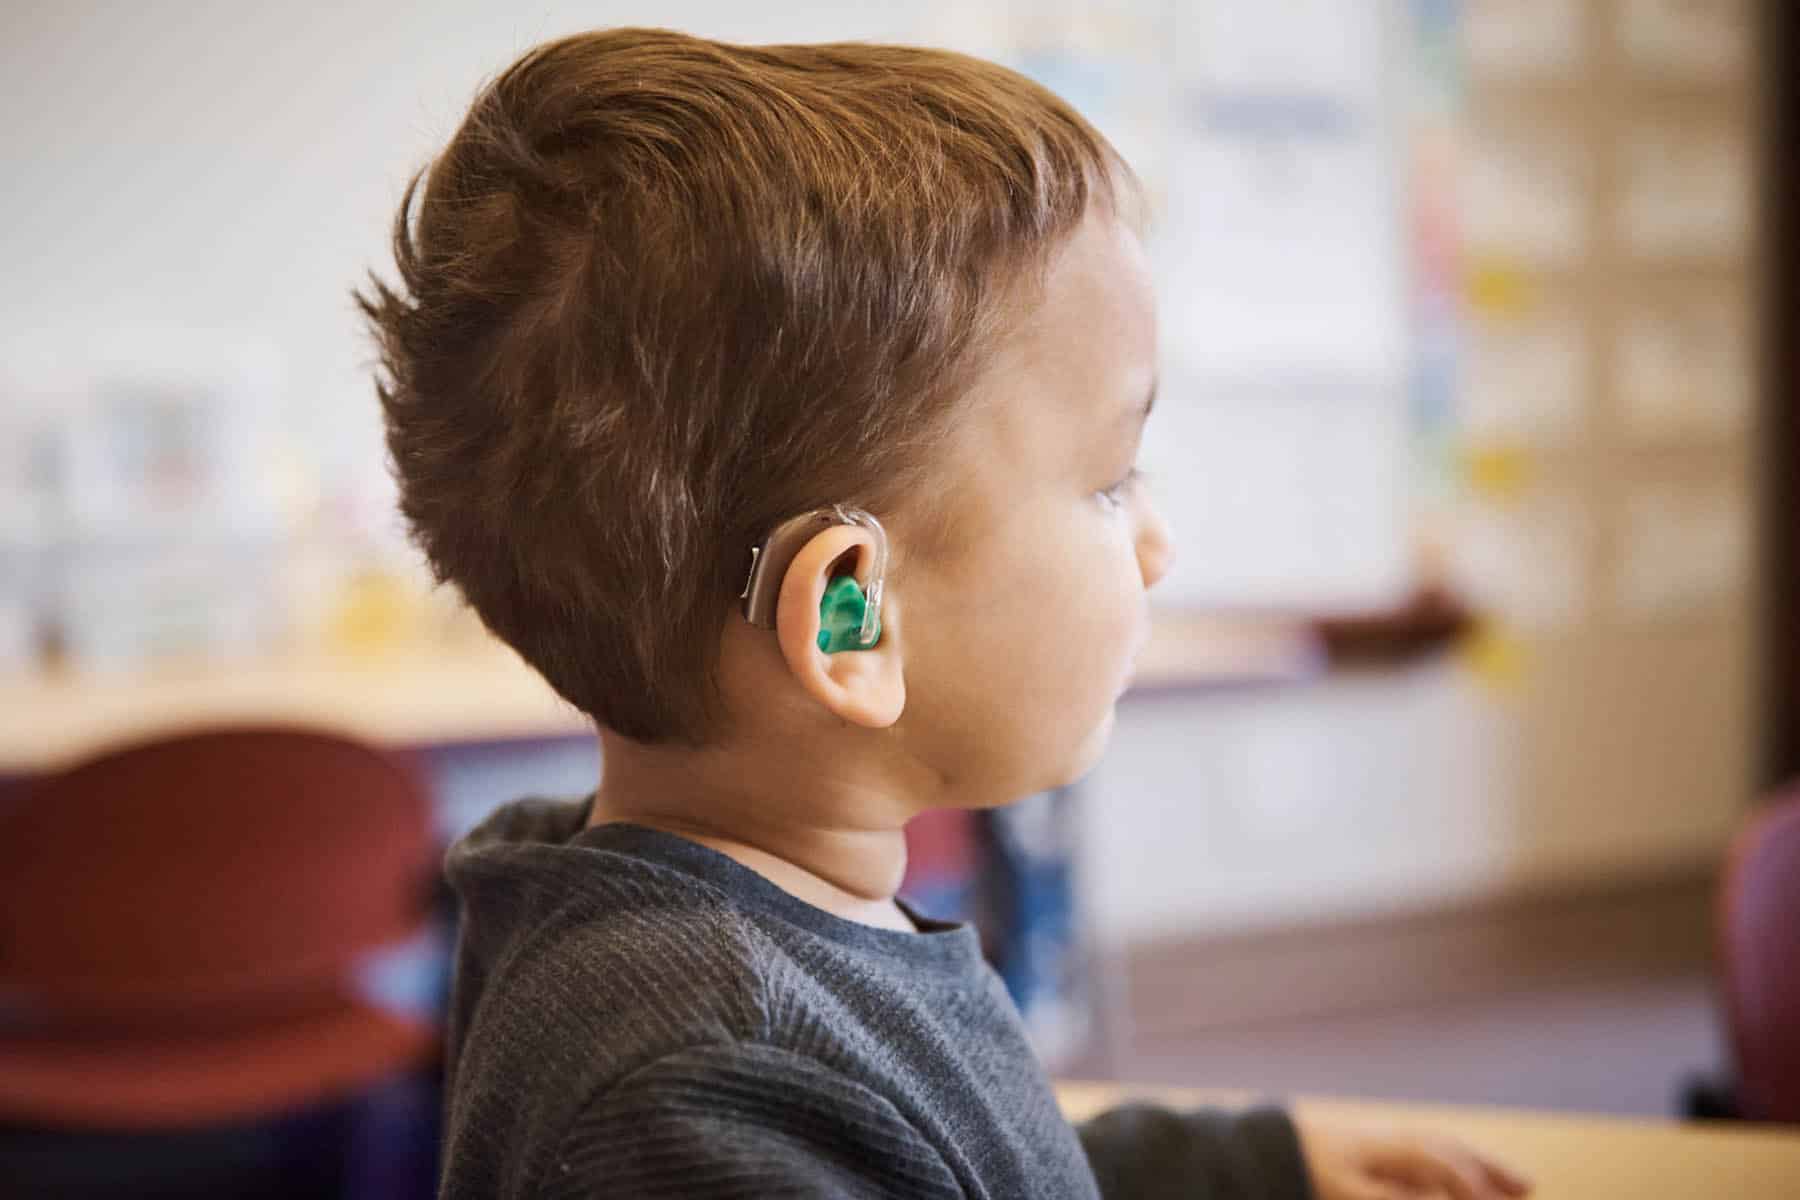 The Ling sound check: An everyday, easy way to determine a child’s access to sounds